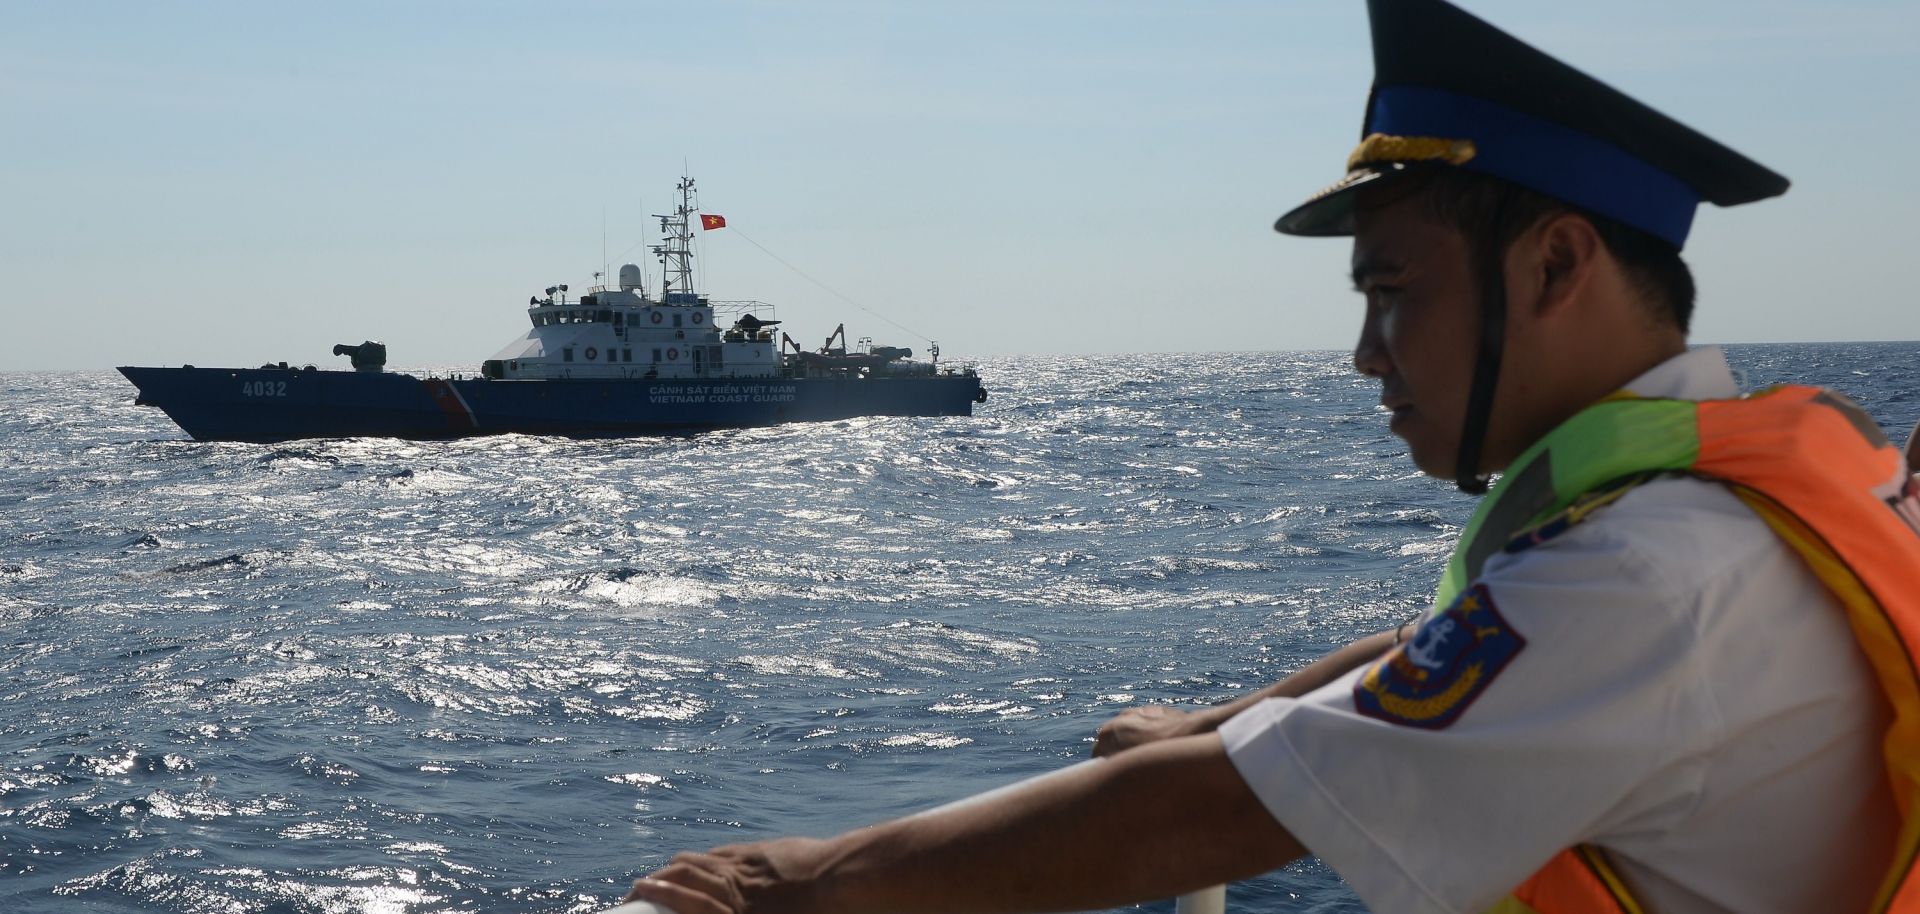 A Vietnamese coast guard officer looks toward a Vietnamese coast guard ship sailing in an area near a Chinese oil-drilling rig in disputed waters of the South China Sea, in May 2014.